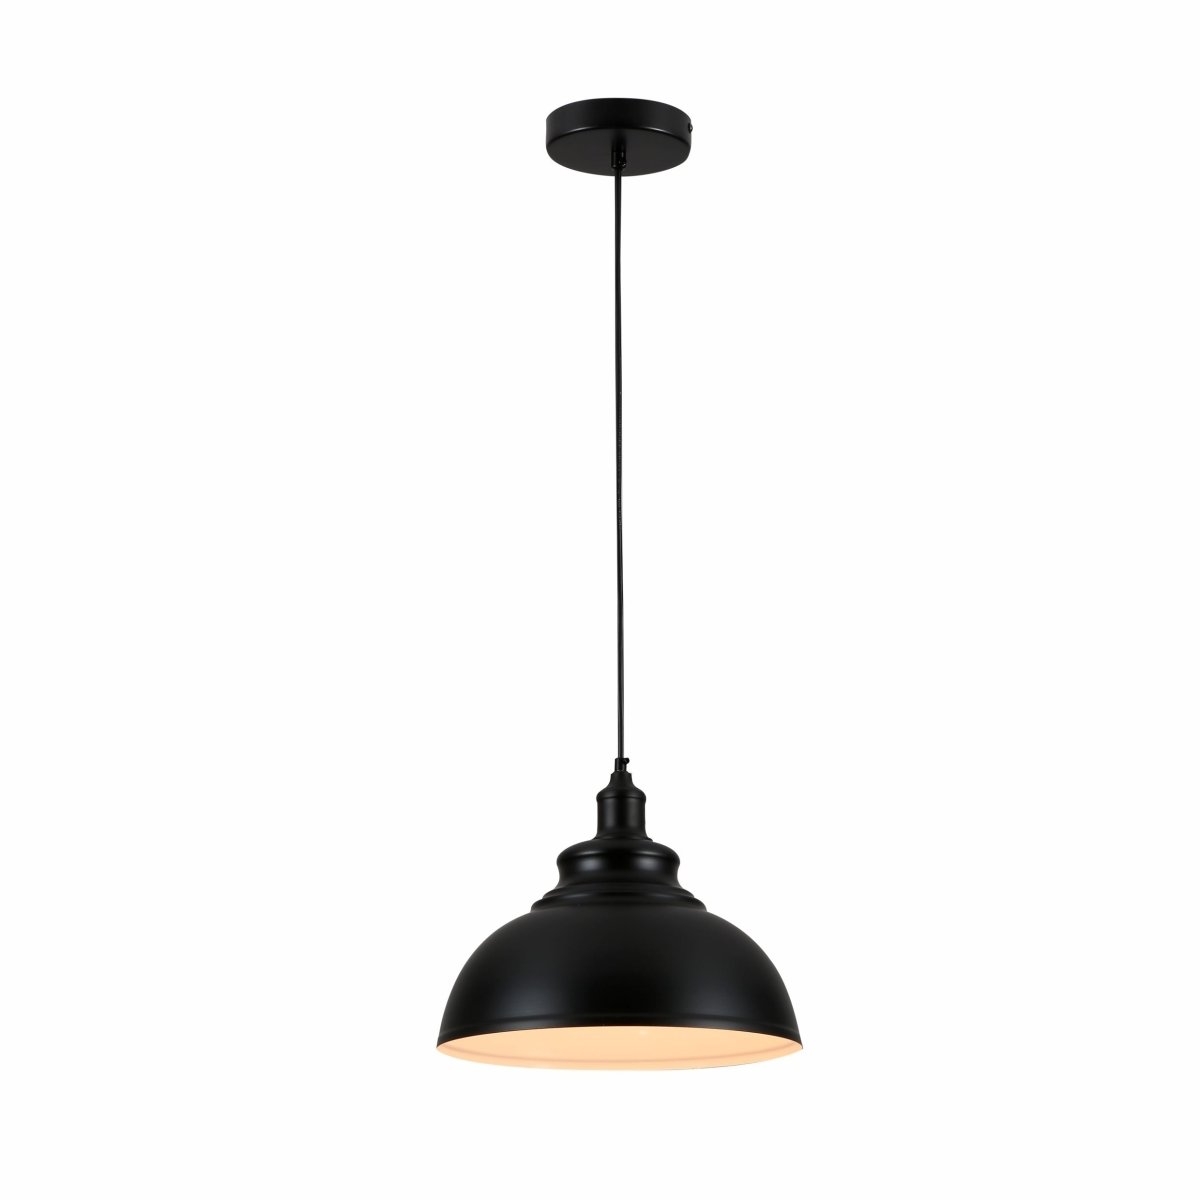 Main image of Black Dome Industrial Large Metal Ceiling Pendant Light with E27 Fitting | TEKLED 150-18364